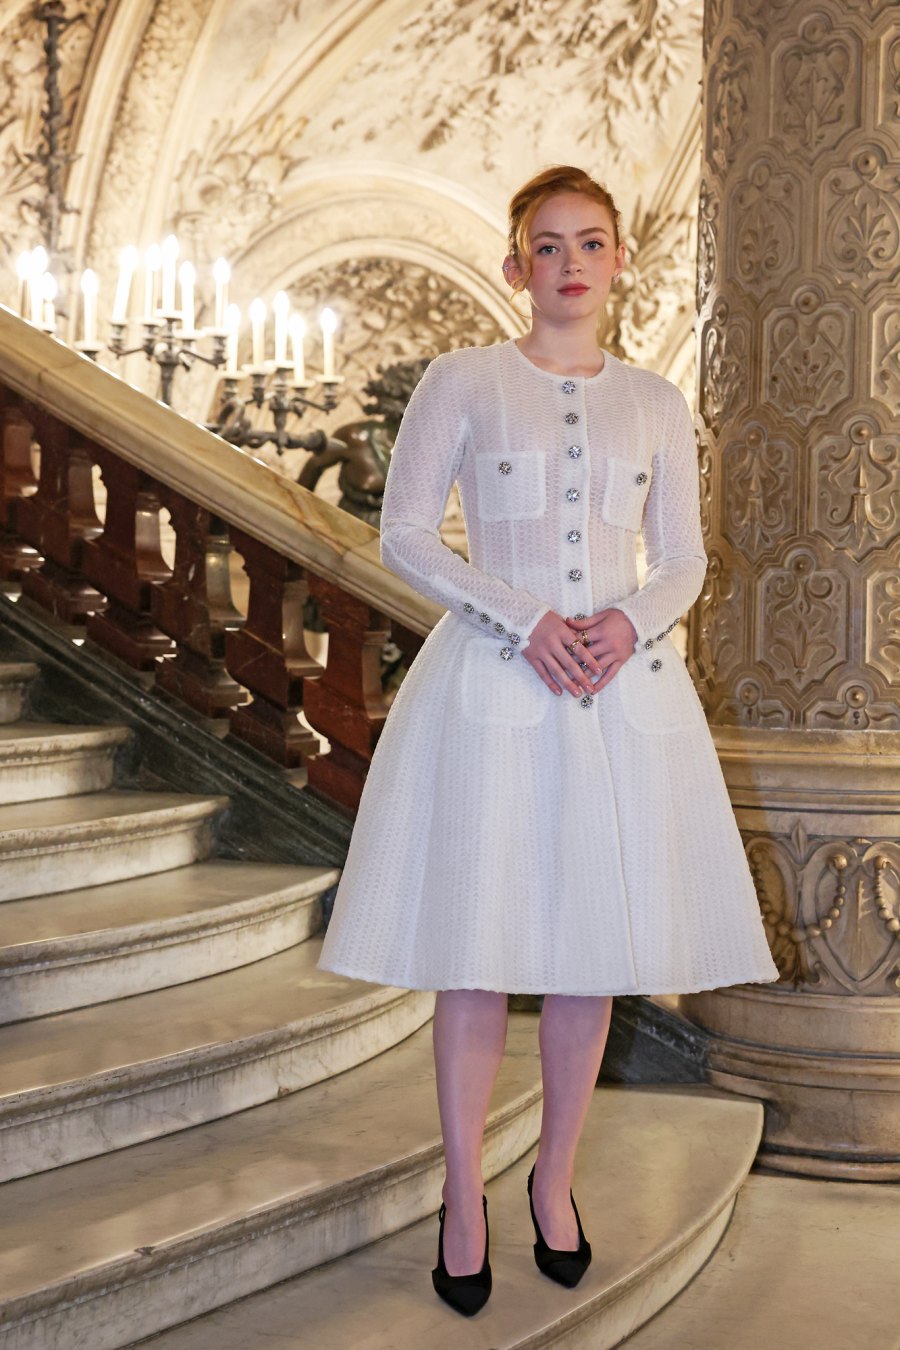 Stars Serve Understated Glamour at Chanel Haute Couture Show